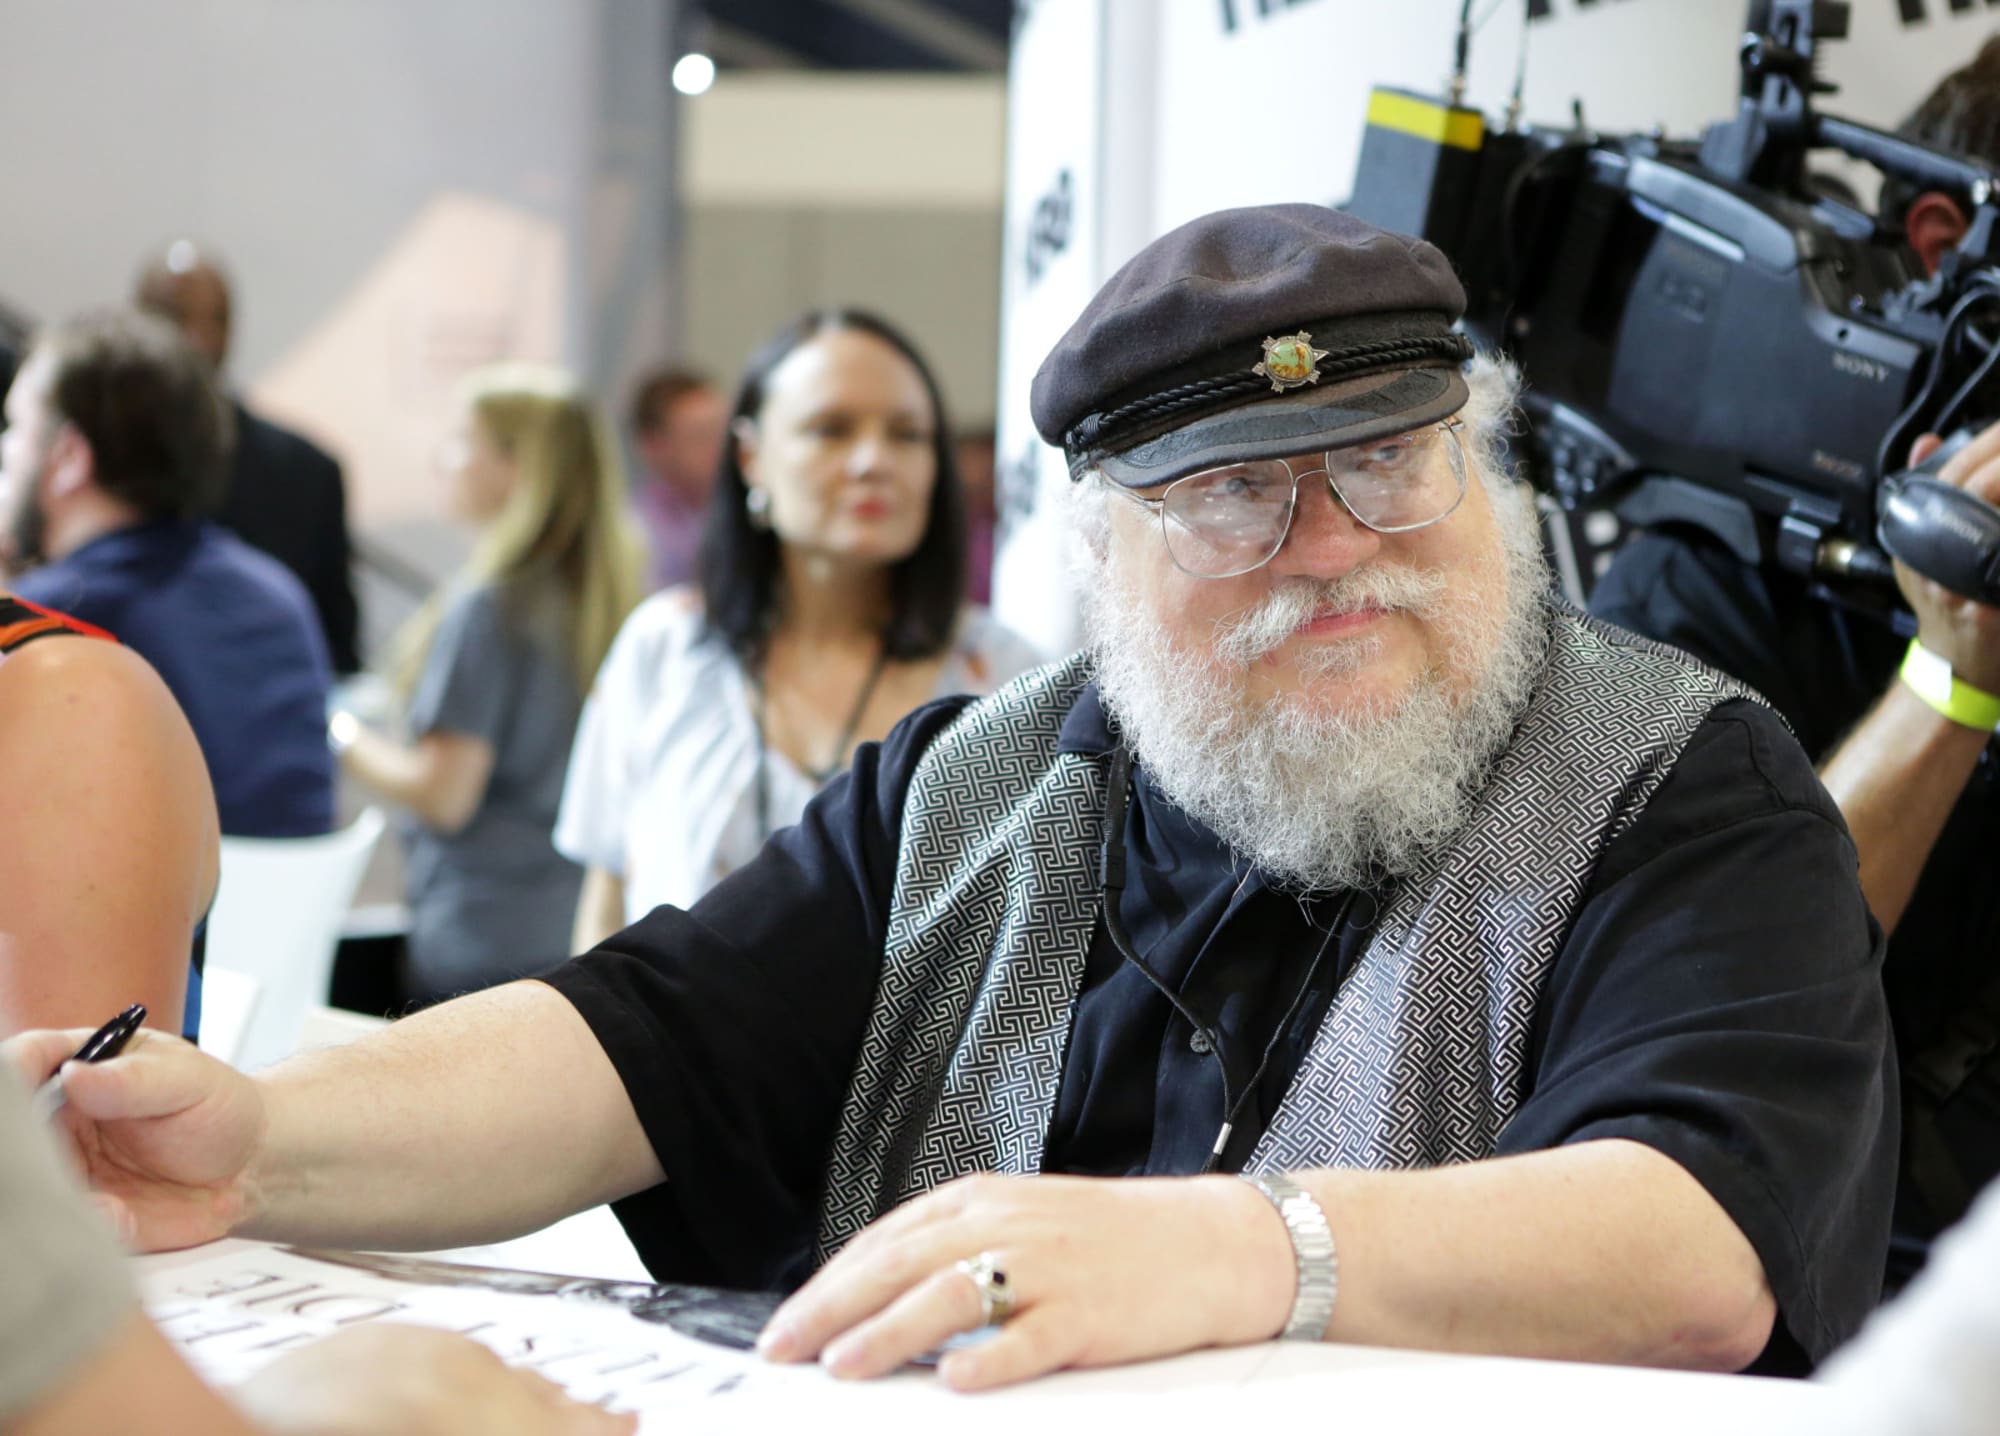 George R.R. Martin responds to criticism over controversial Hugo remarks